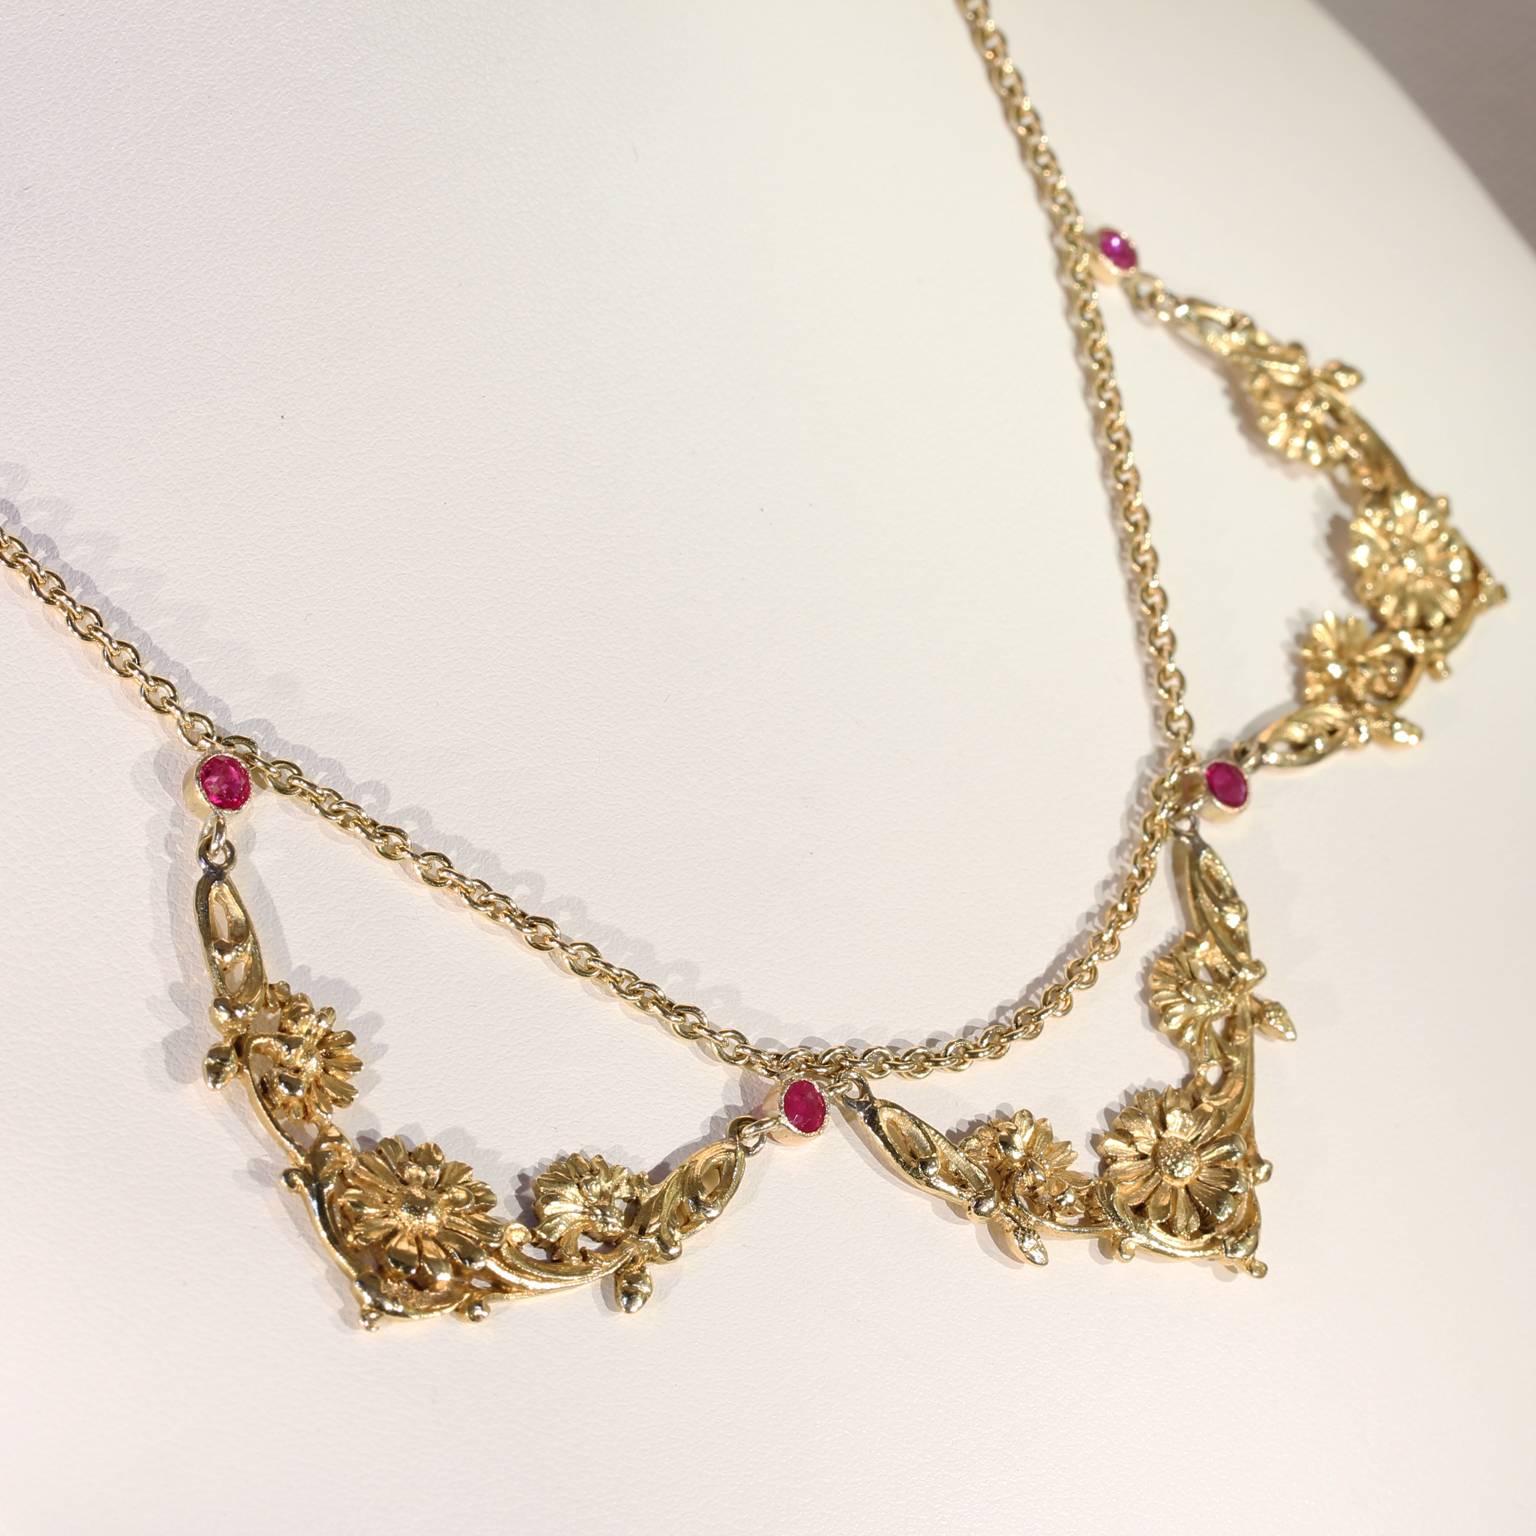 This antique ruby and 18 karat gold necklace was handcrafted in France, around 1900. It features a flower motif that dips down not once, not twice, but three times, as though it’s a garden vining around your neck. The design holds four bright pink